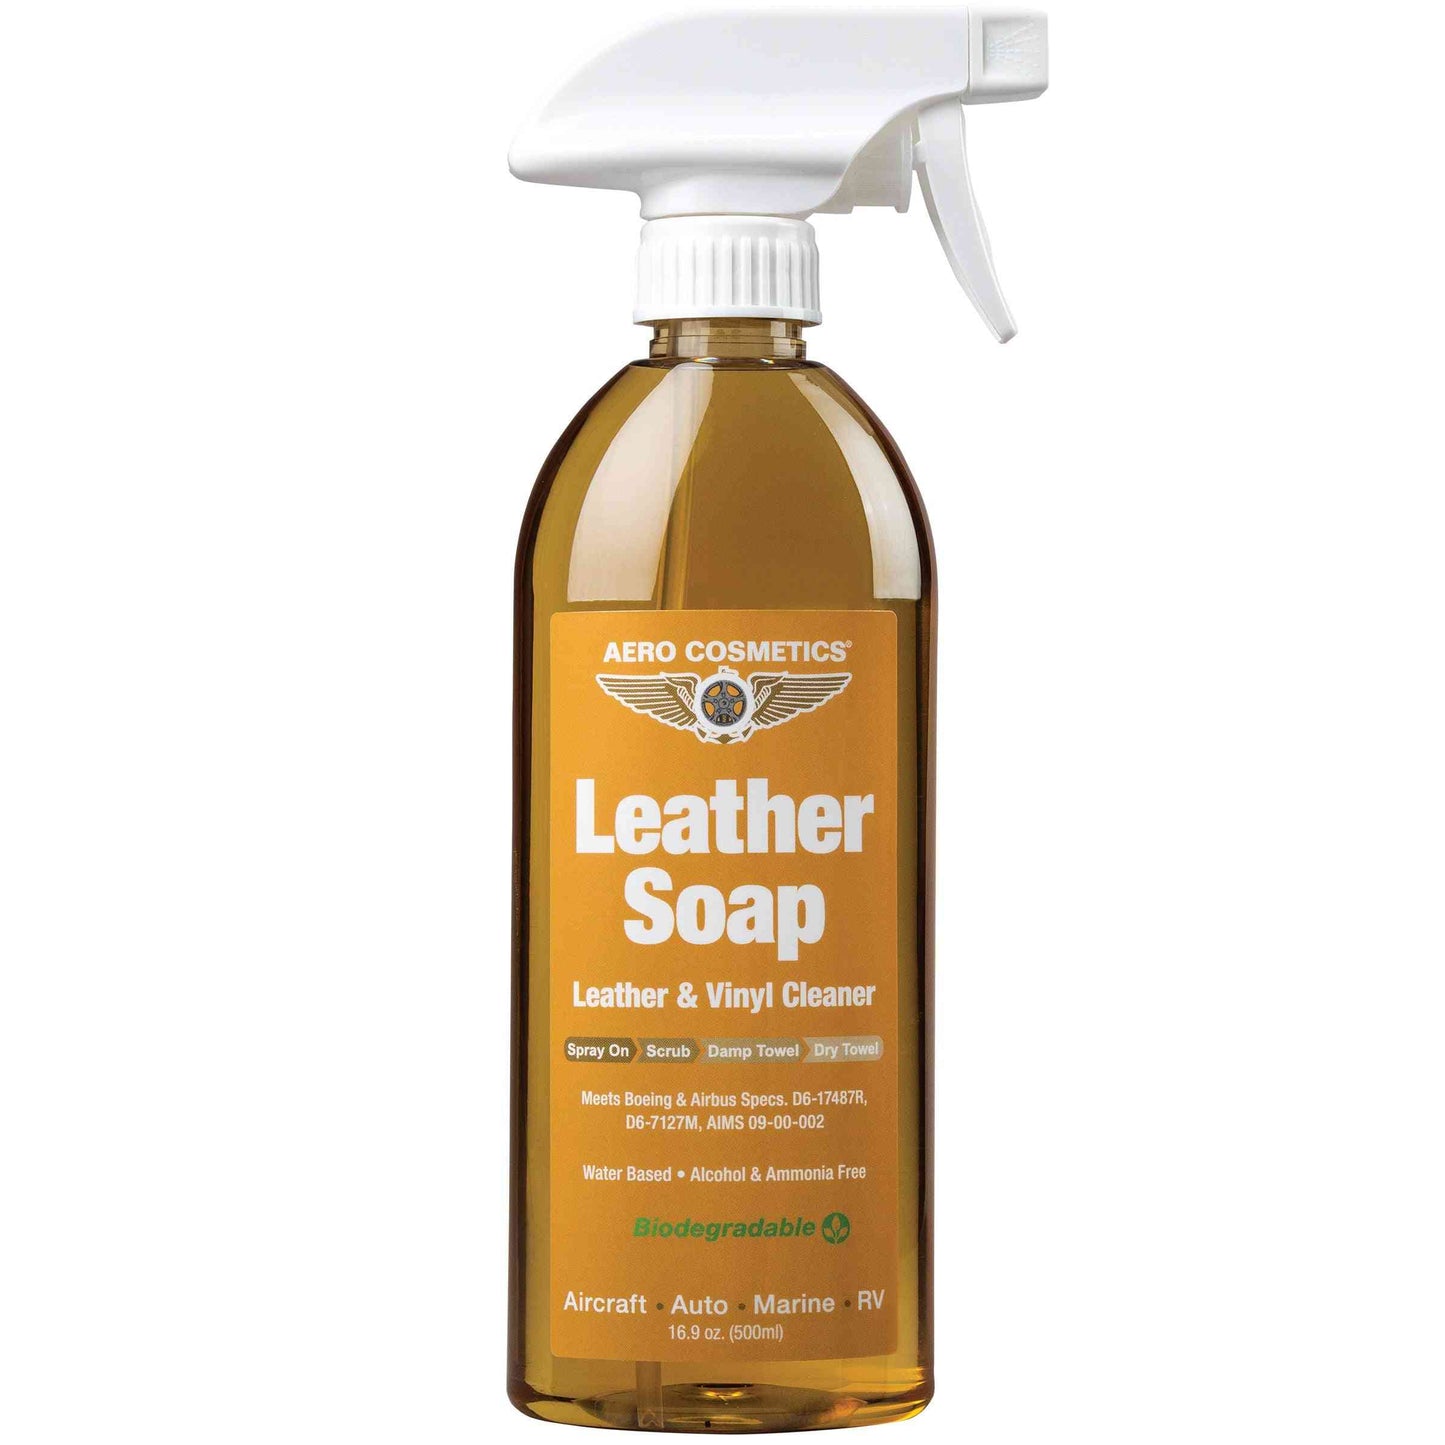 Leather Soap 16 Fl. oz - Leather & Vinyl Cleaner